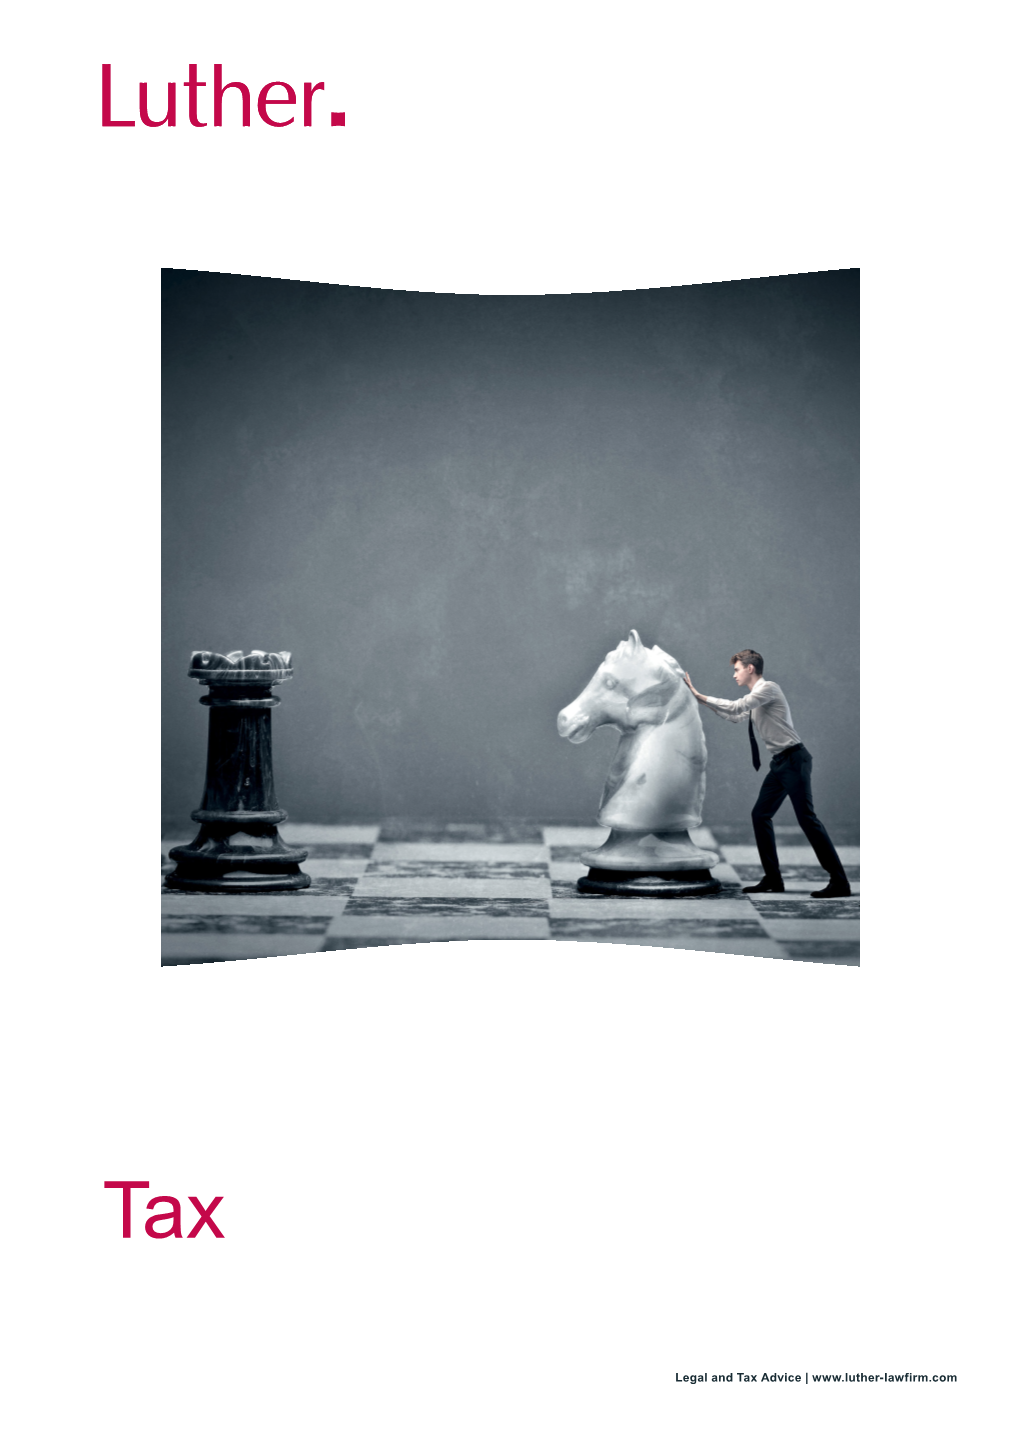 Legal and Tax Advice